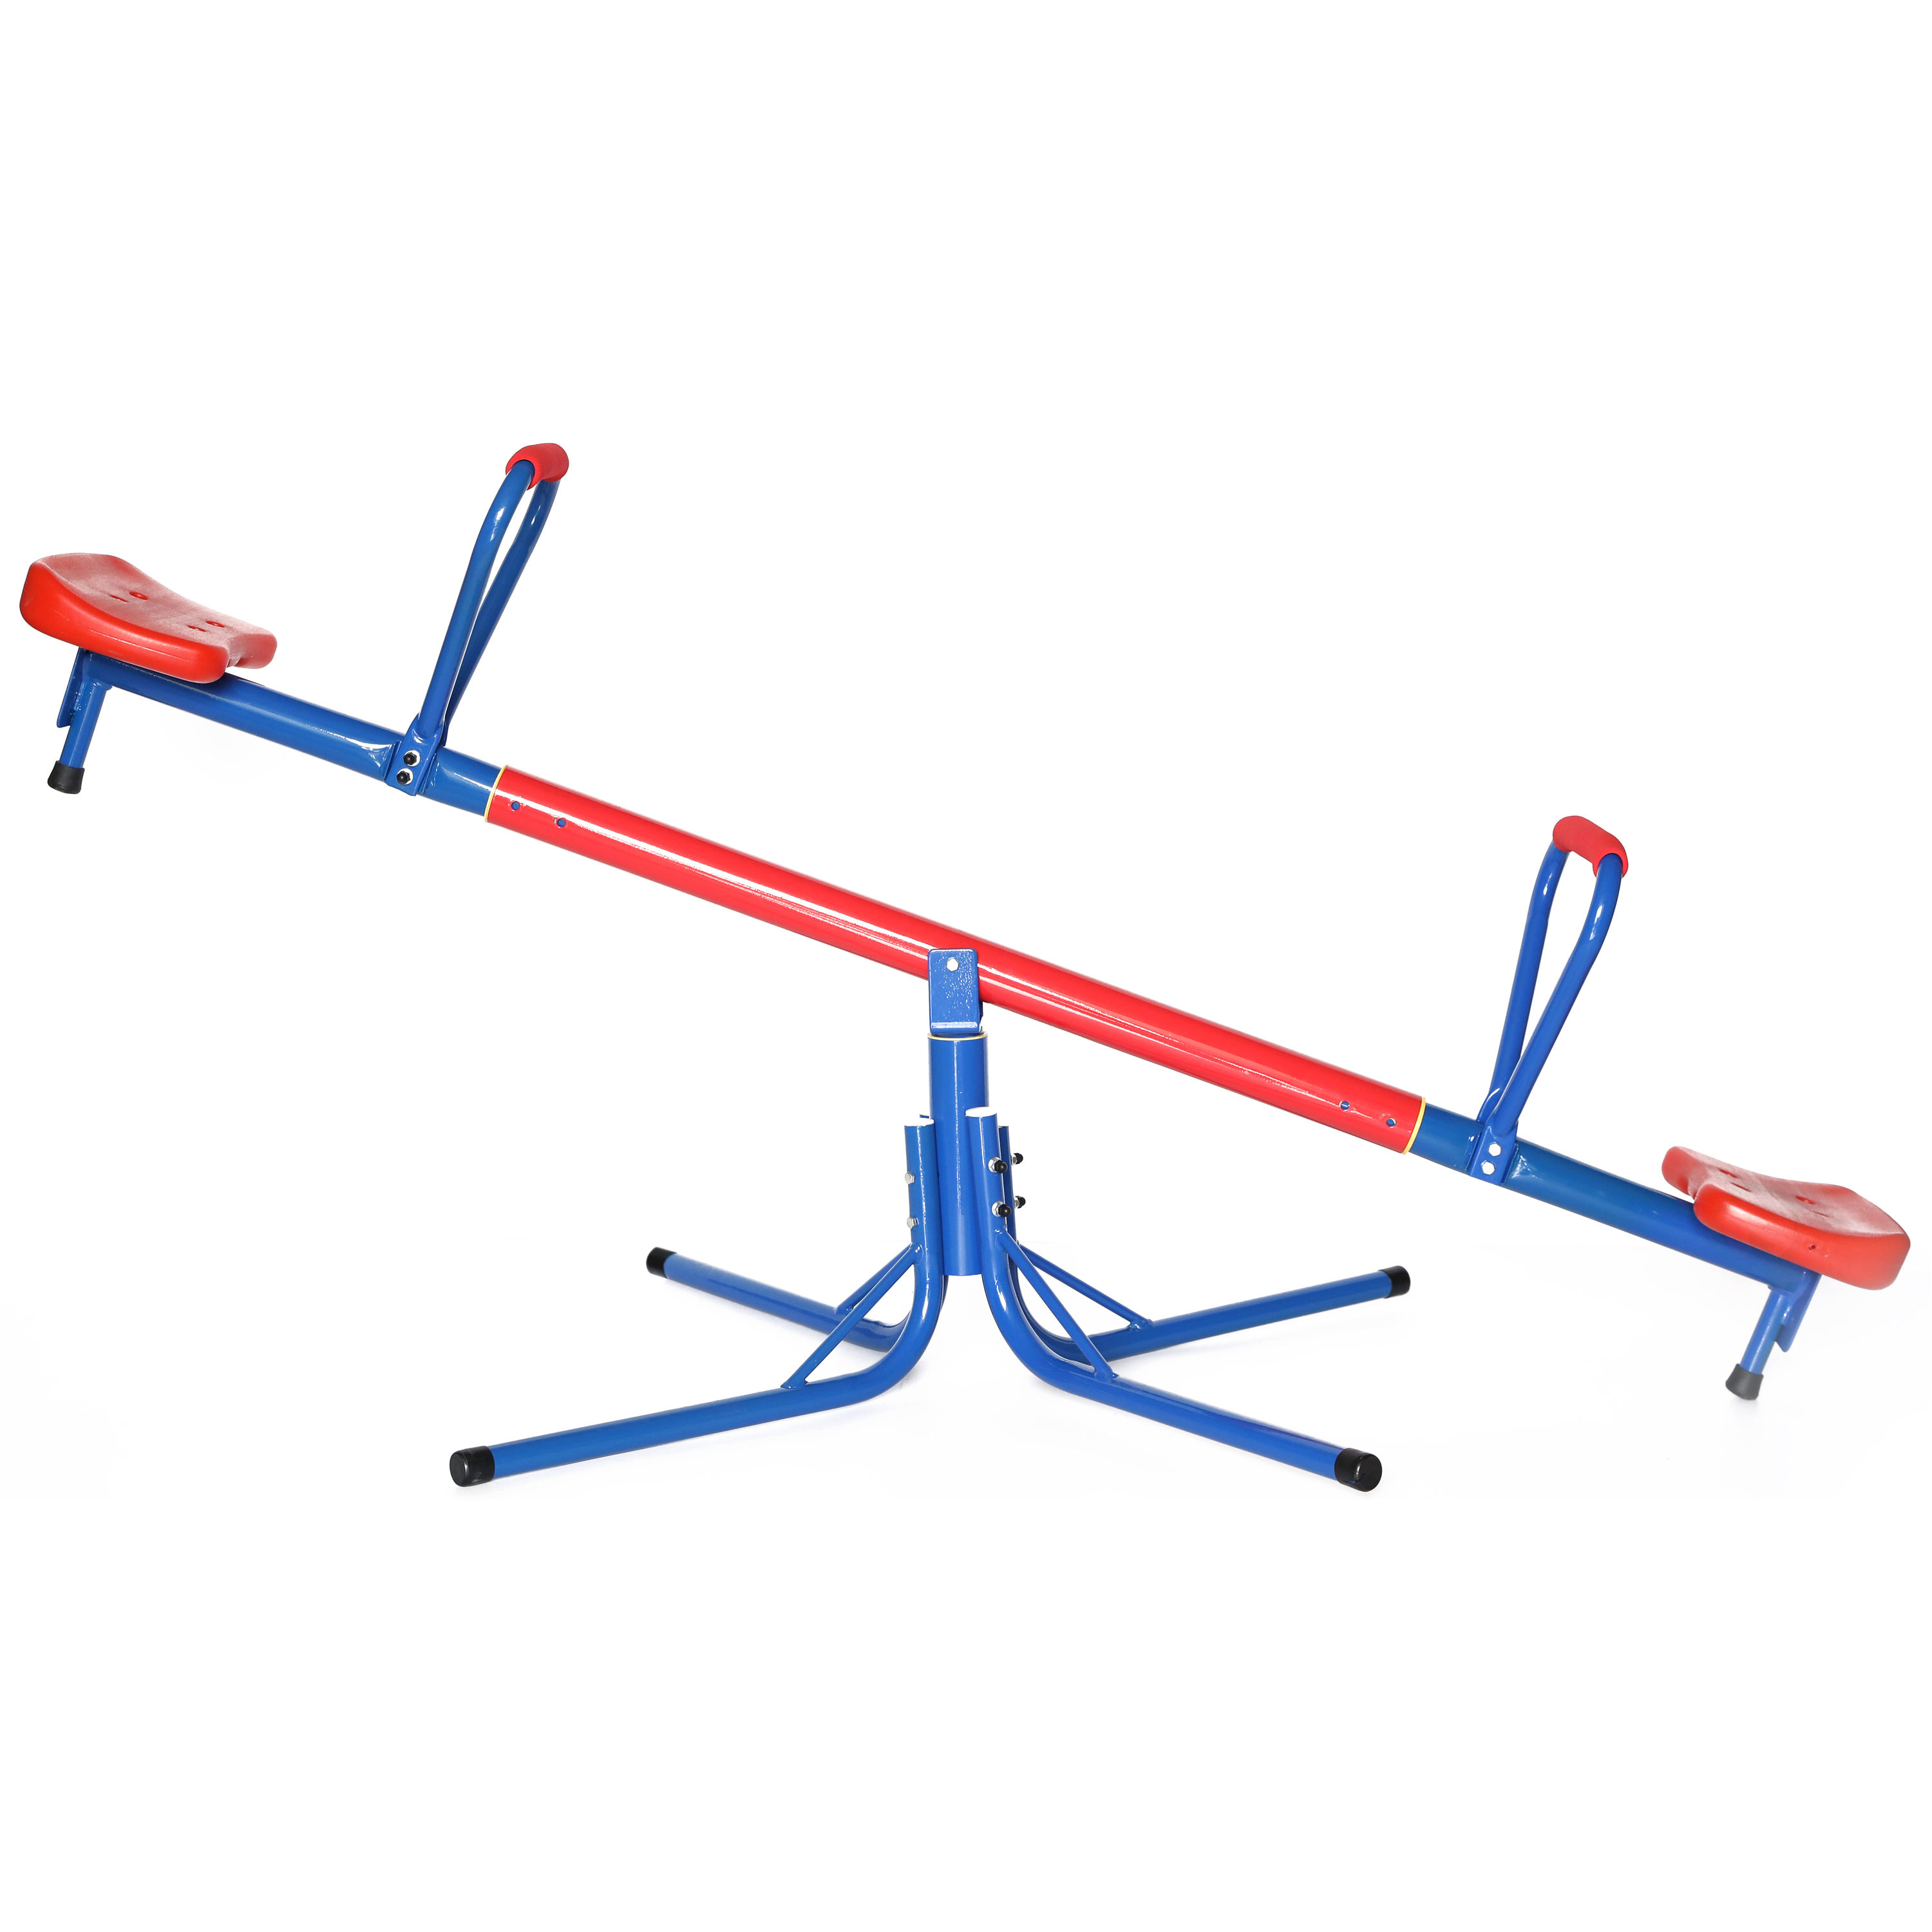 Outdoor Red And Blue Metal Rotating Seesaw